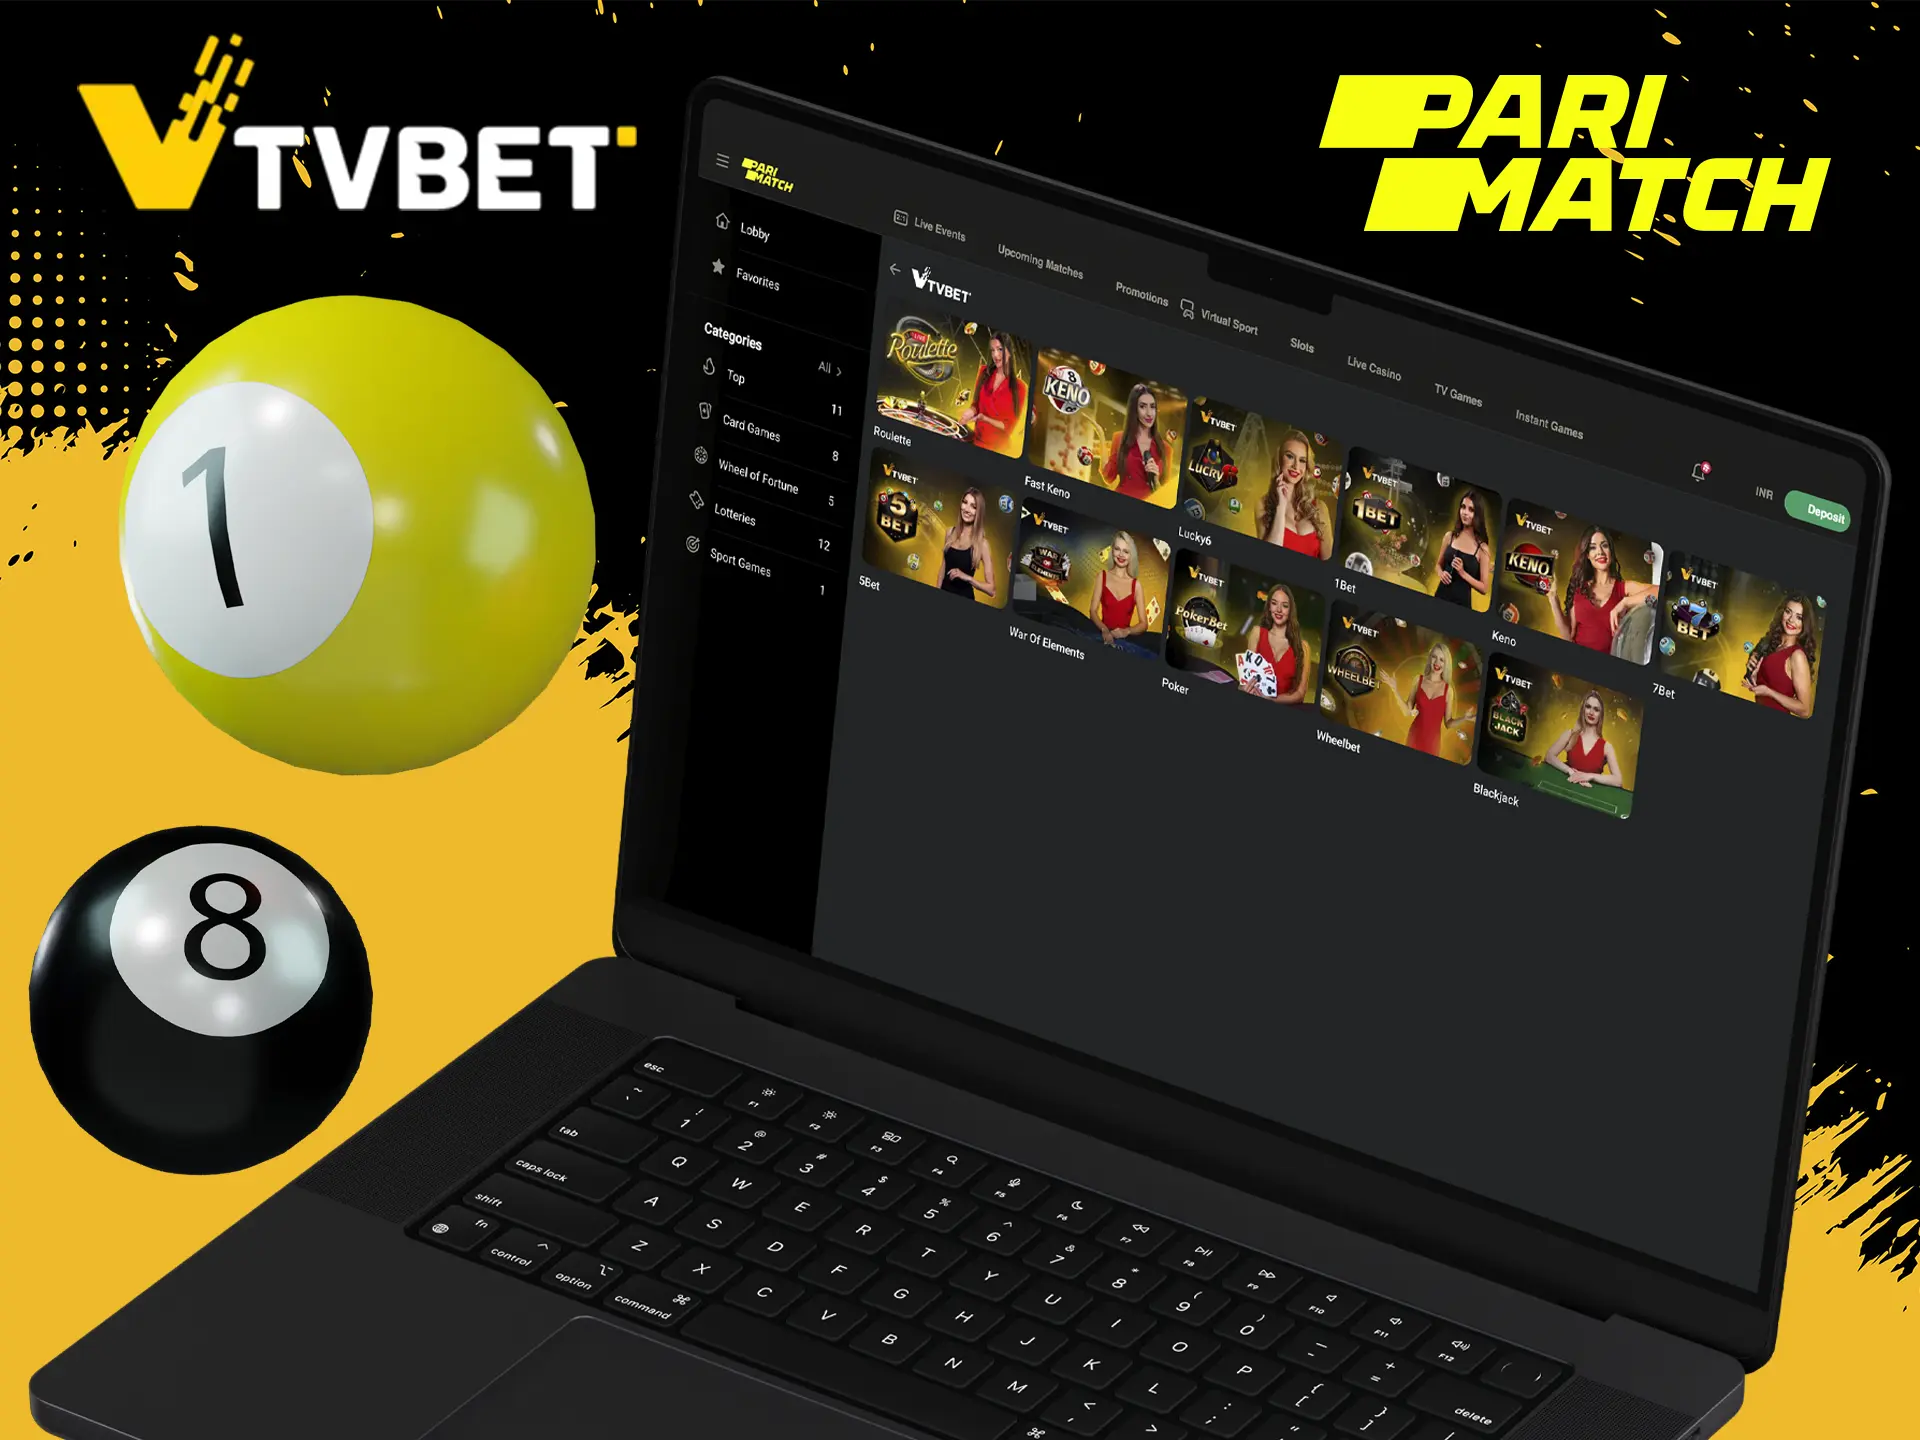 Don't miss your chance to earn a bet by watching TVBet provider's broadcasts at Parimatch Casino.